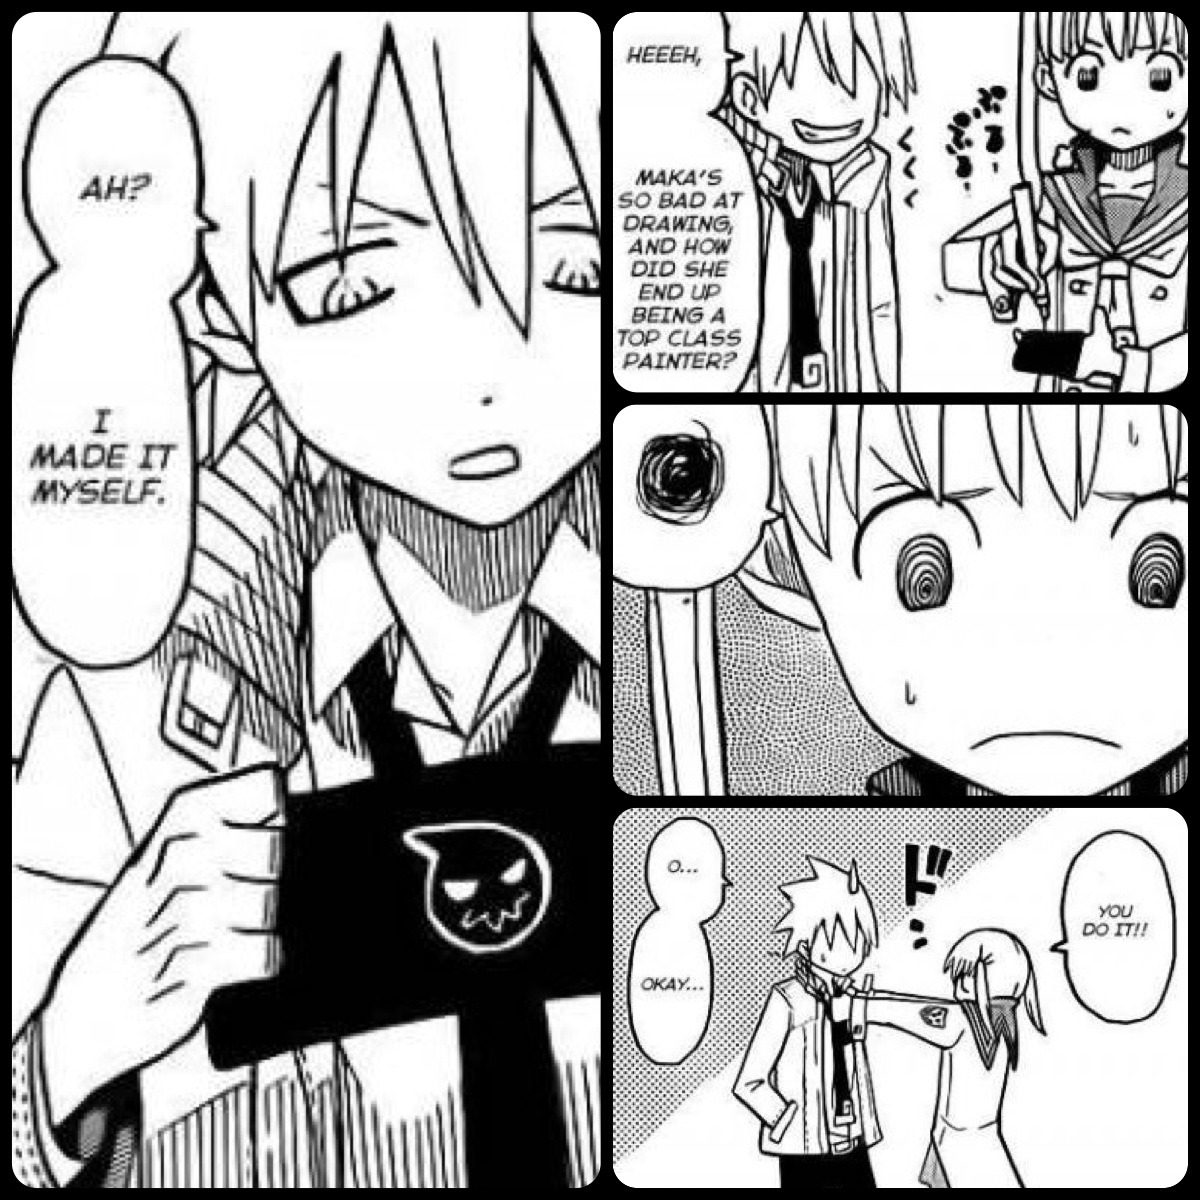 Maka from Soul Eater makes a reference to the Manga Ending in the